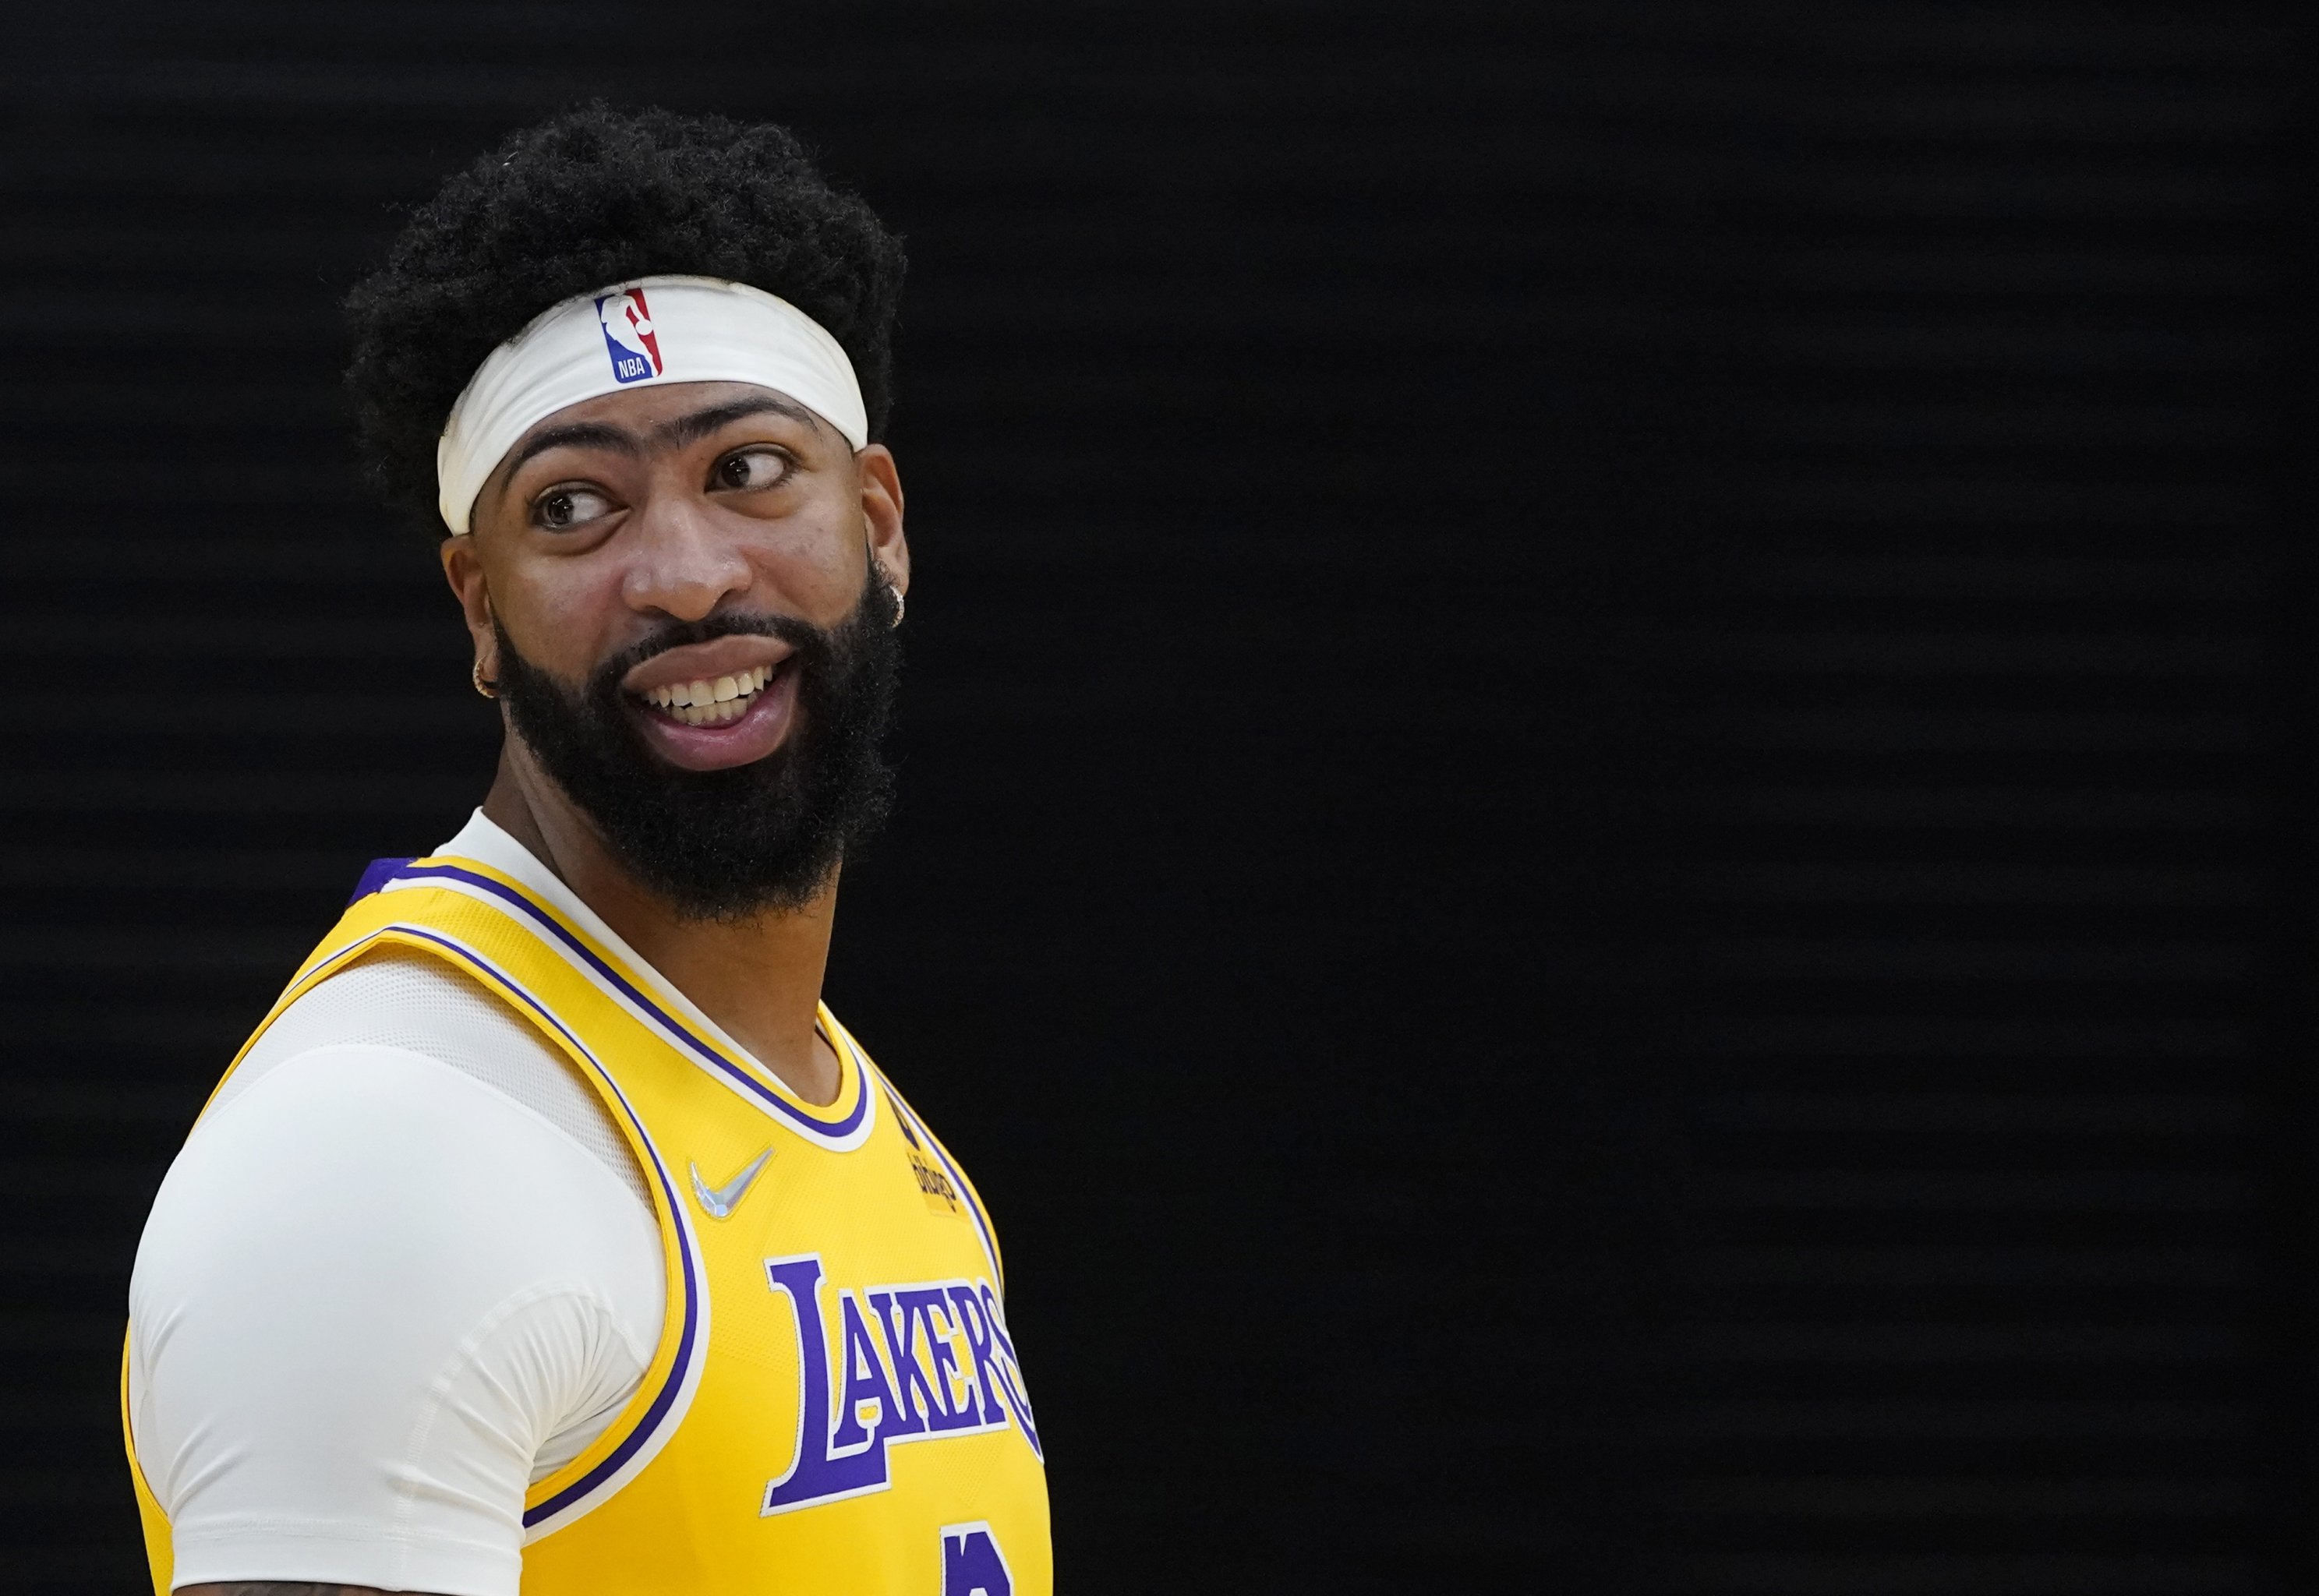 NBA news, scores, results 2022: LeBron James pulls a Ben Simmons, gives up  layup in Lakers loss to Rockets, video